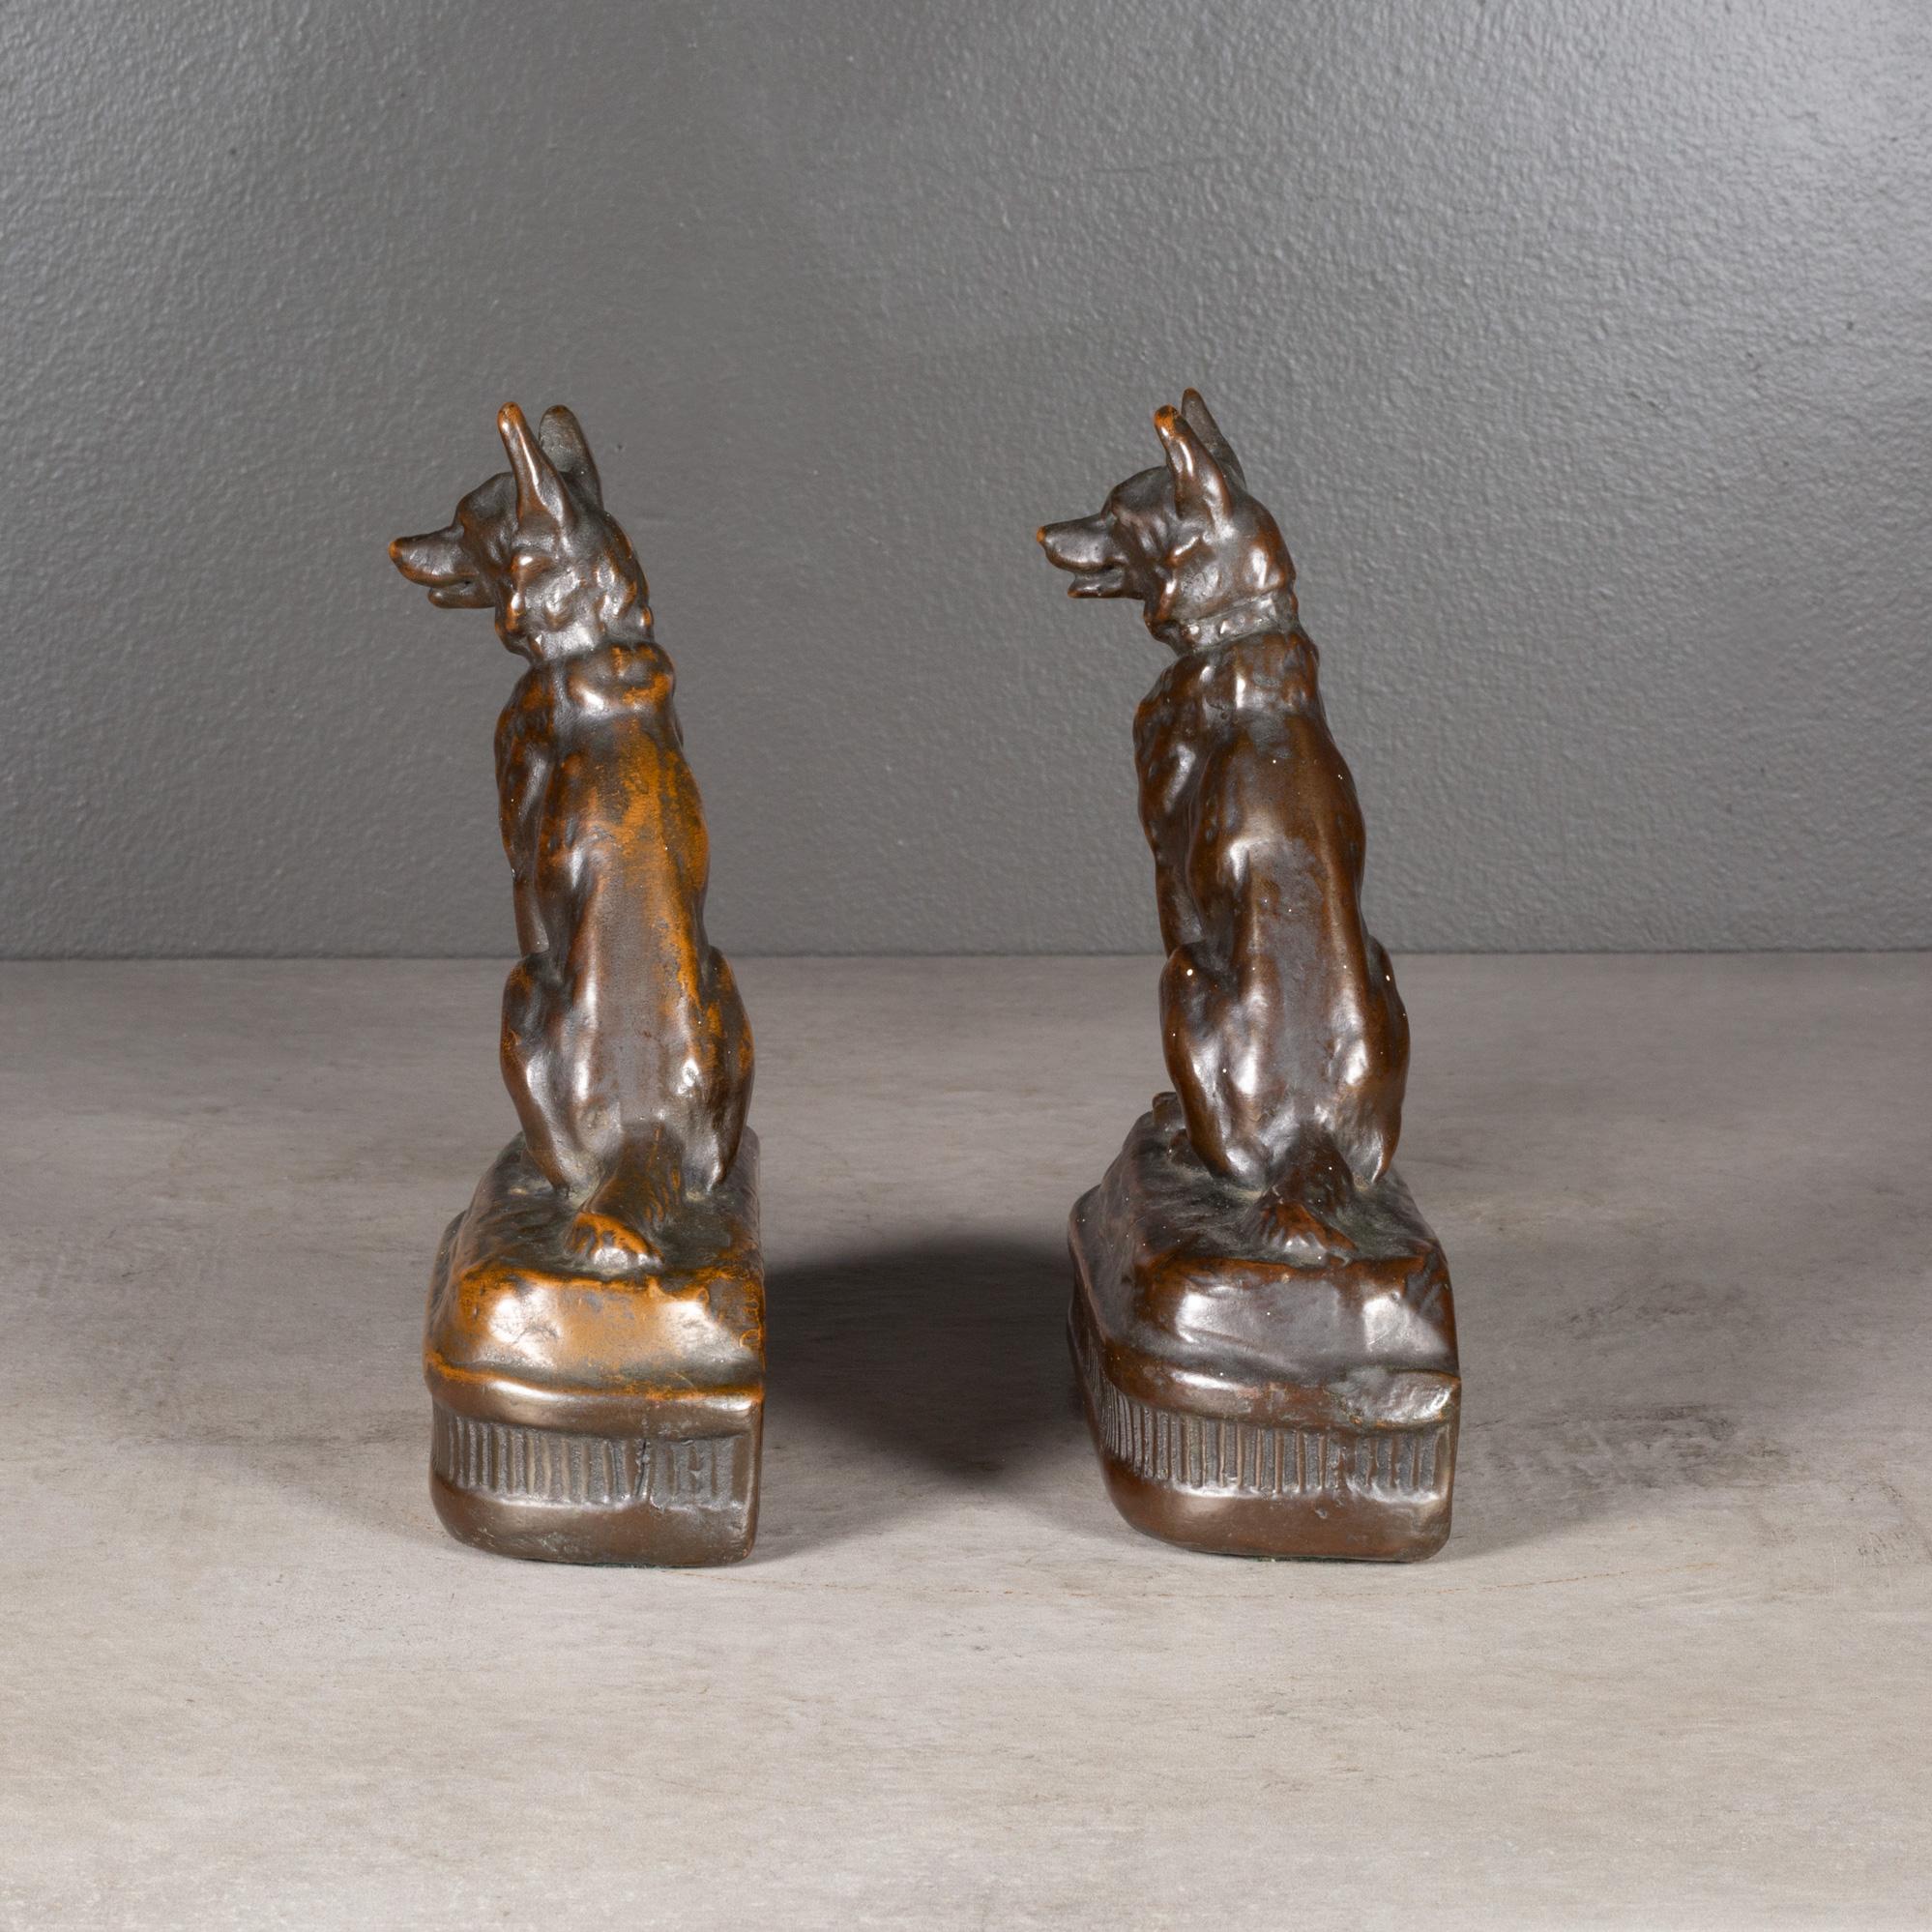 Bronze Cast German Shepherd Bookends by Armor Bronze, C.1930 (FREE SHIPPING) In Good Condition For Sale In San Francisco, CA